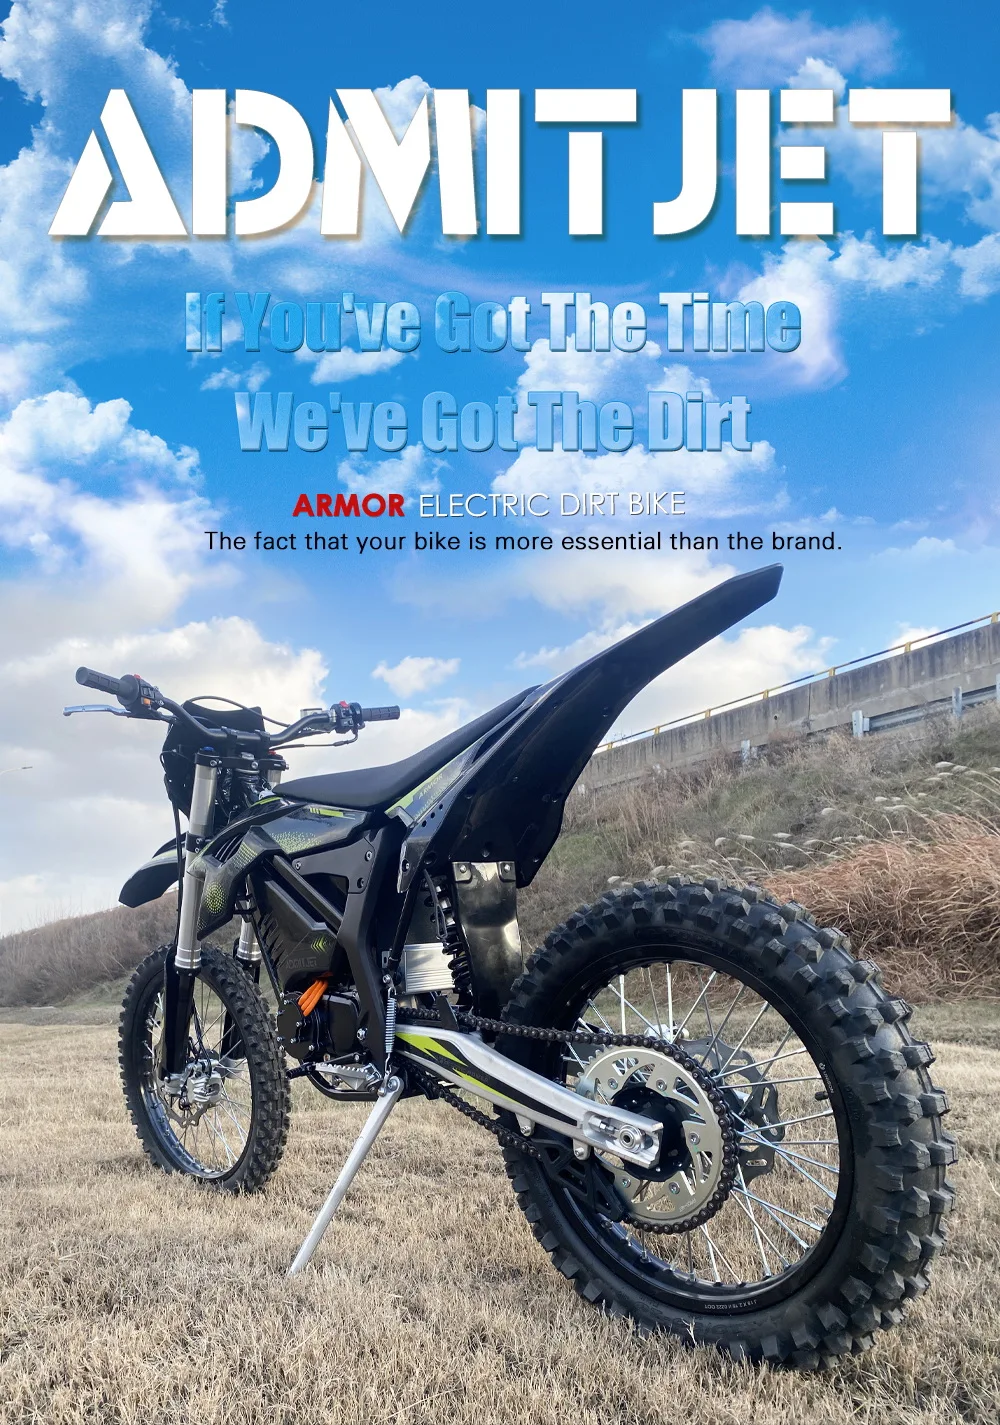 Full Size Electric Dirt Bike Most Powerful For Urban and Offroad